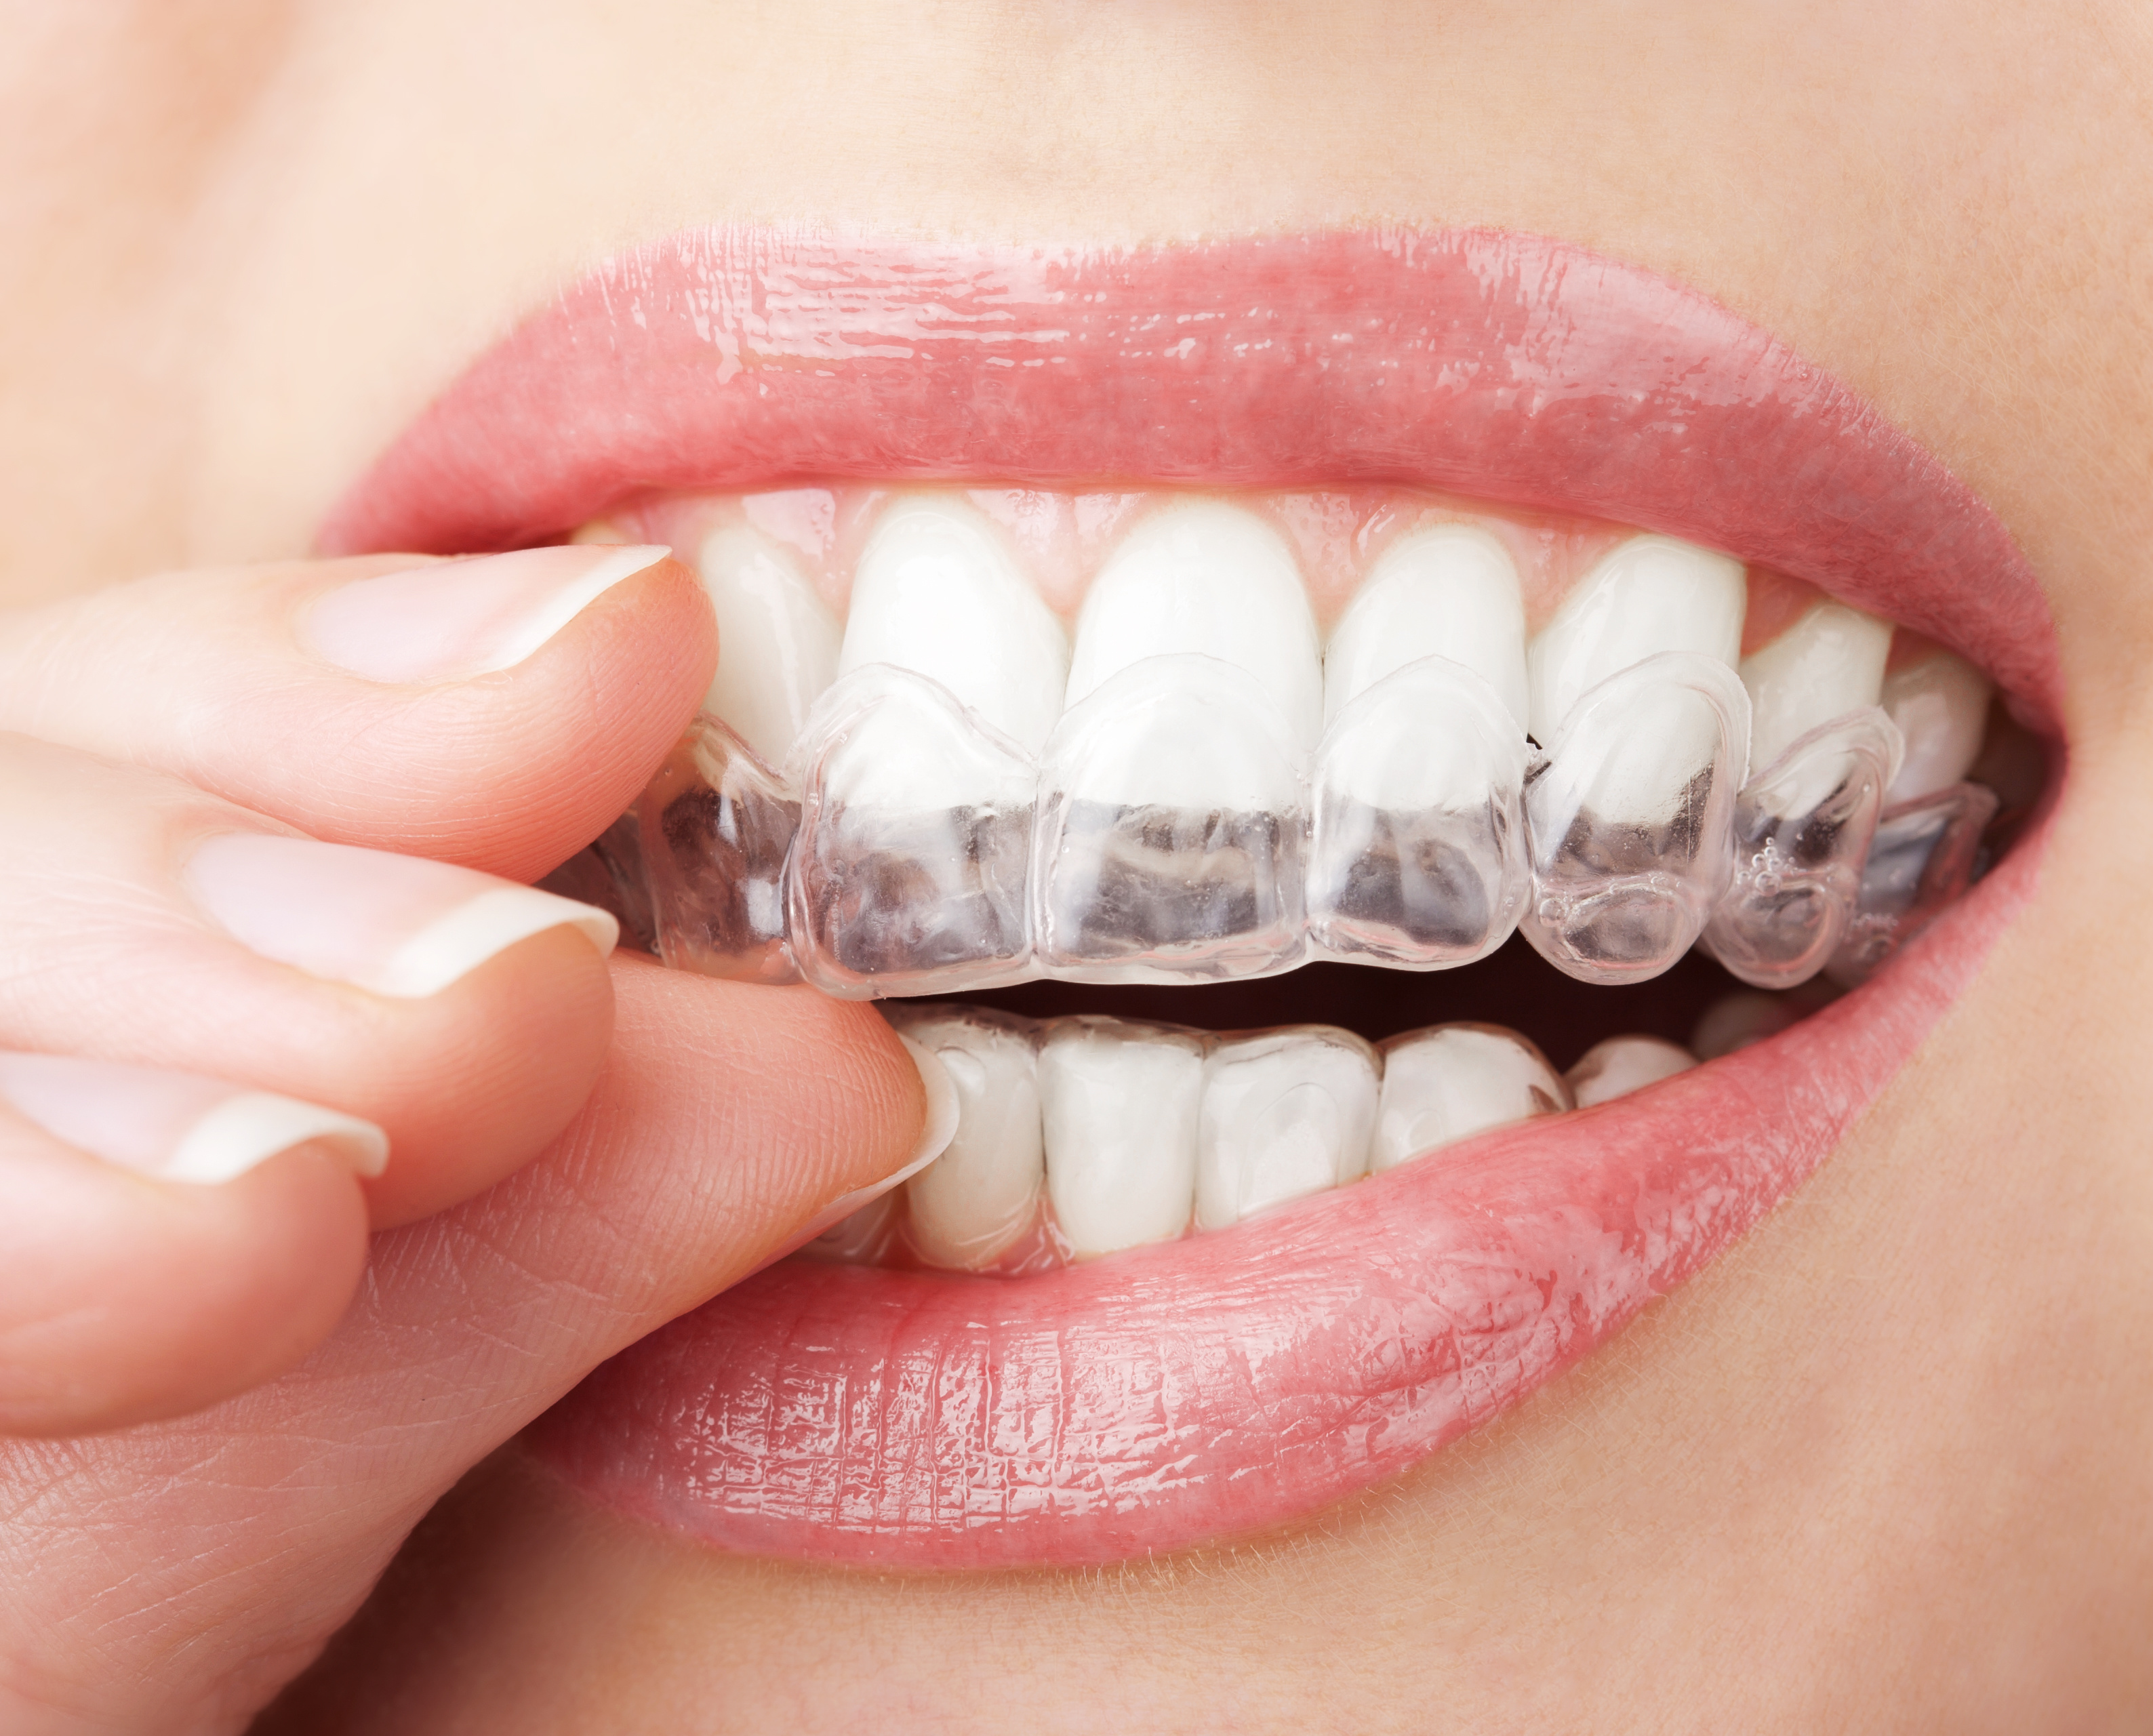 Consult an Orthodontist to Fix Your Dental Alignment Problems And Restore Smile